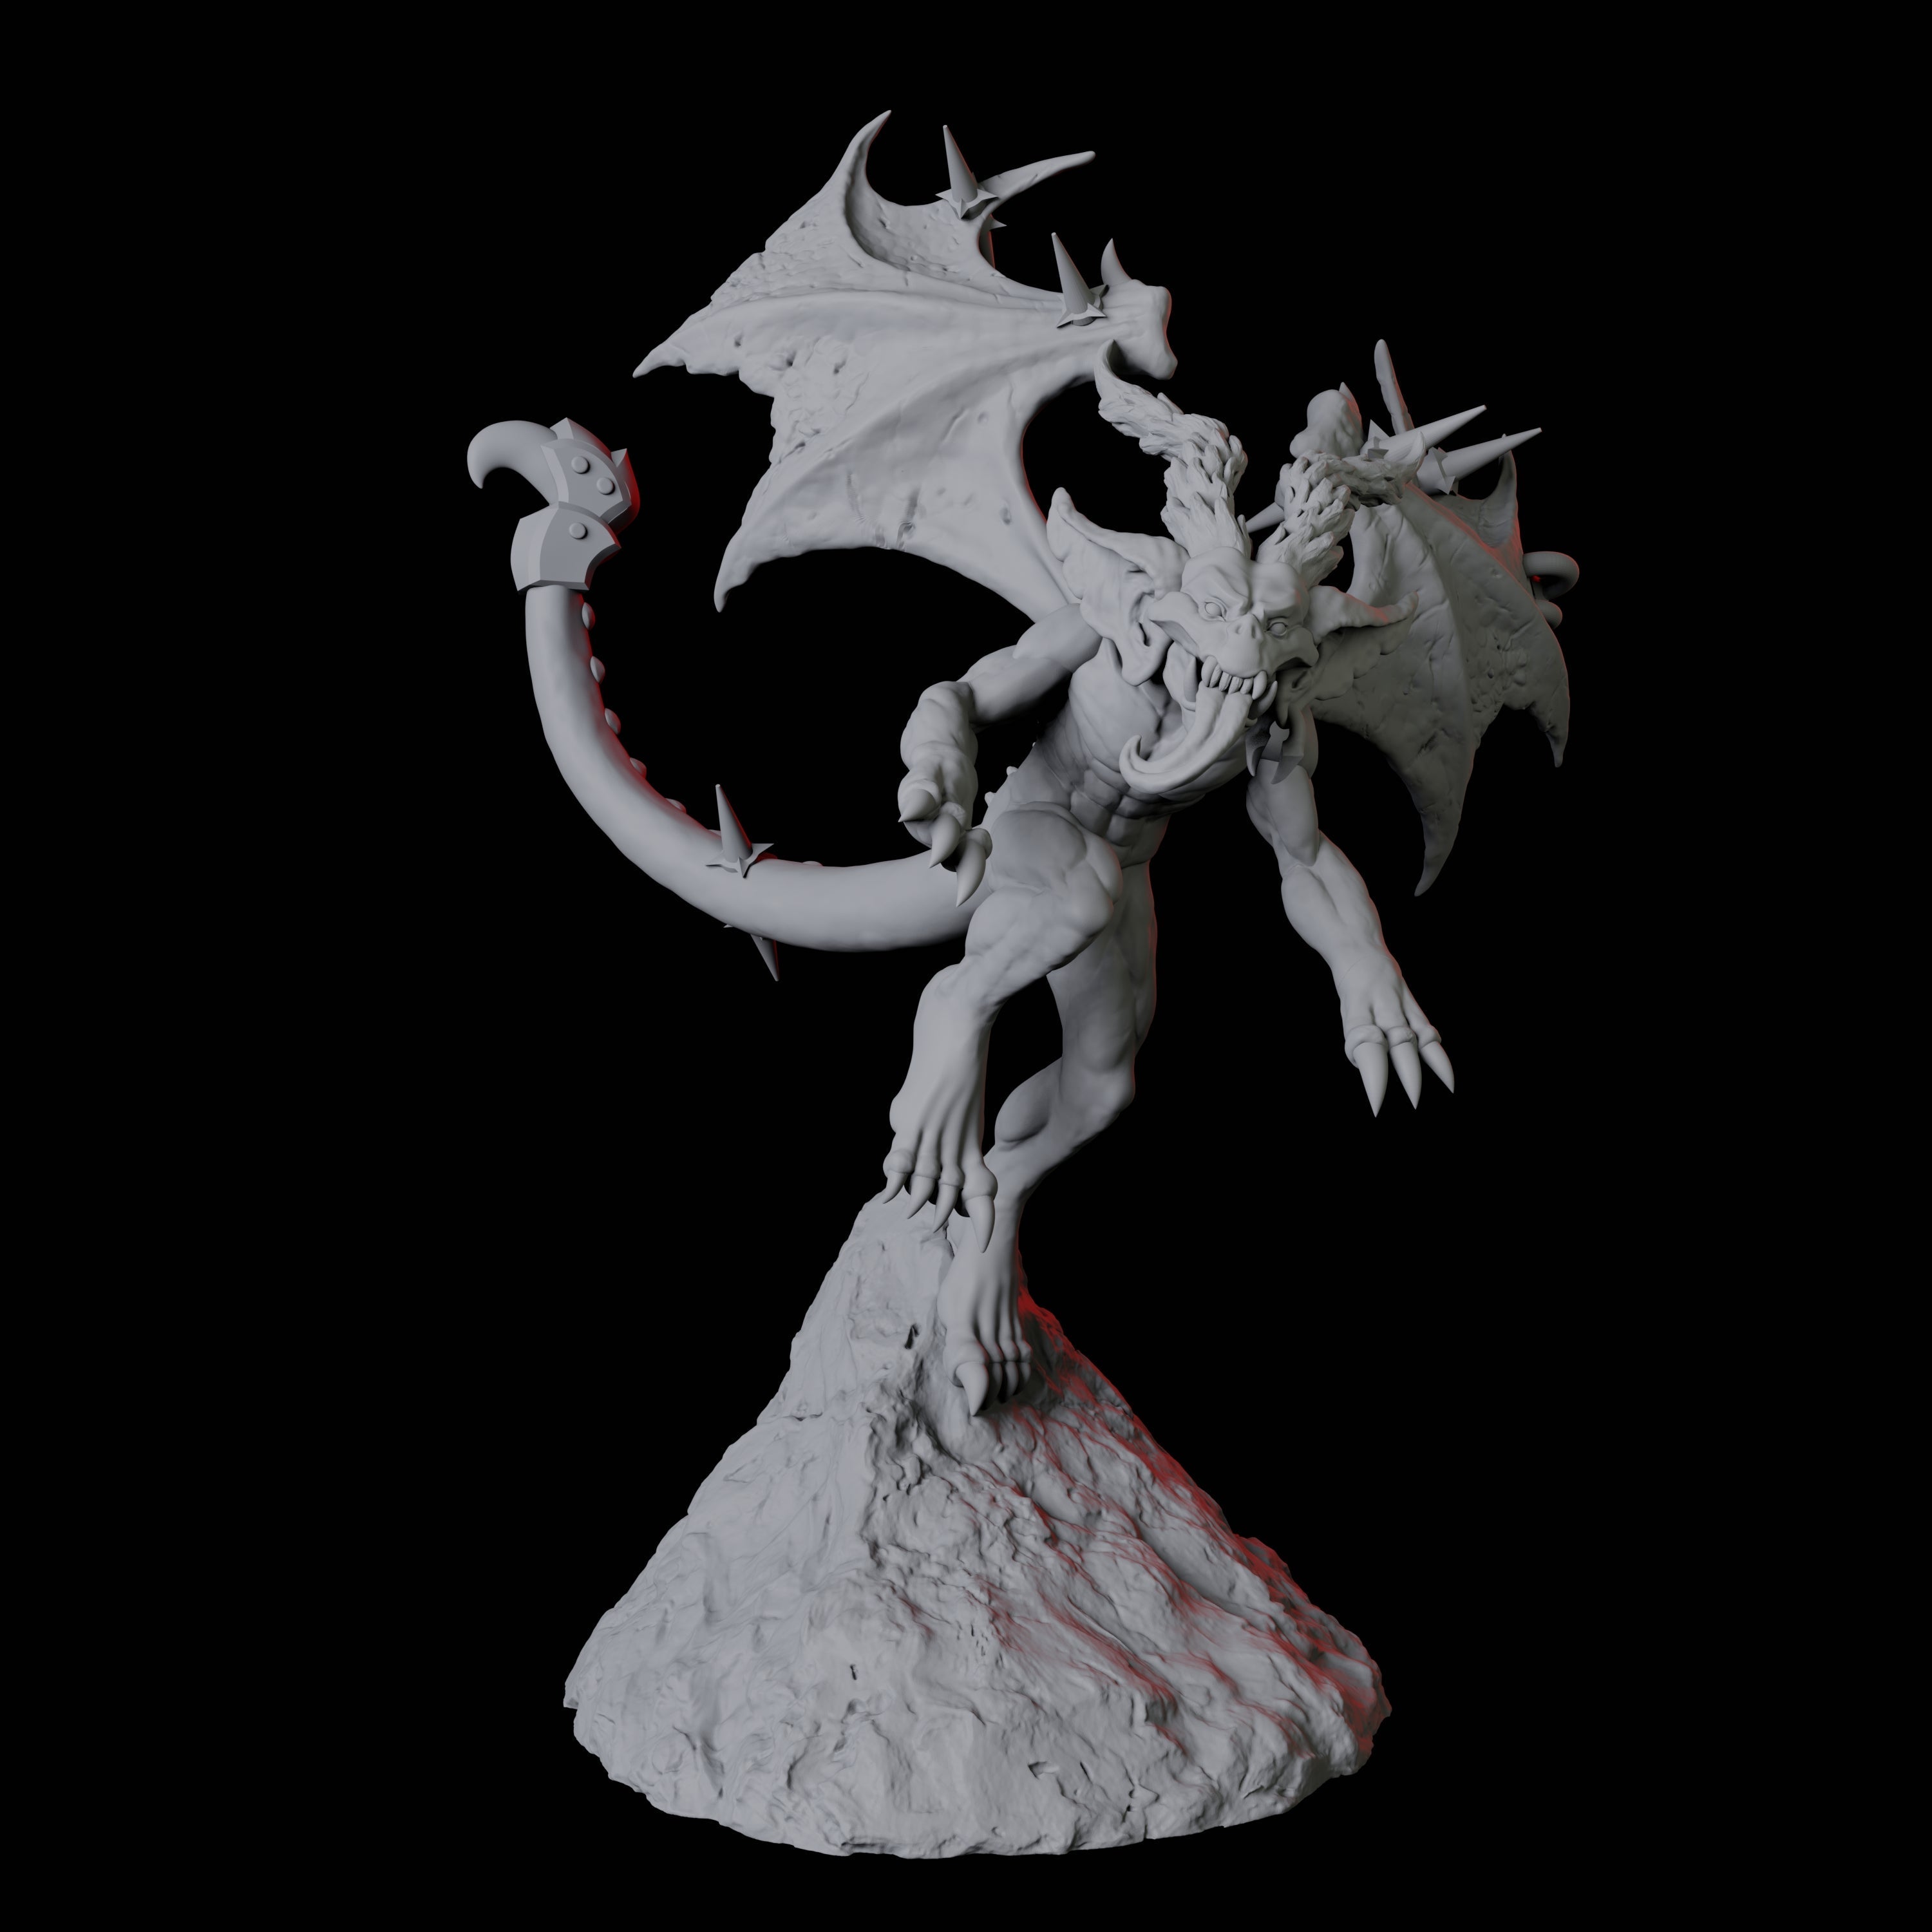 Four Sassy Imps Miniature for Dungeons and Dragons, Pathfinder or other TTRPGs